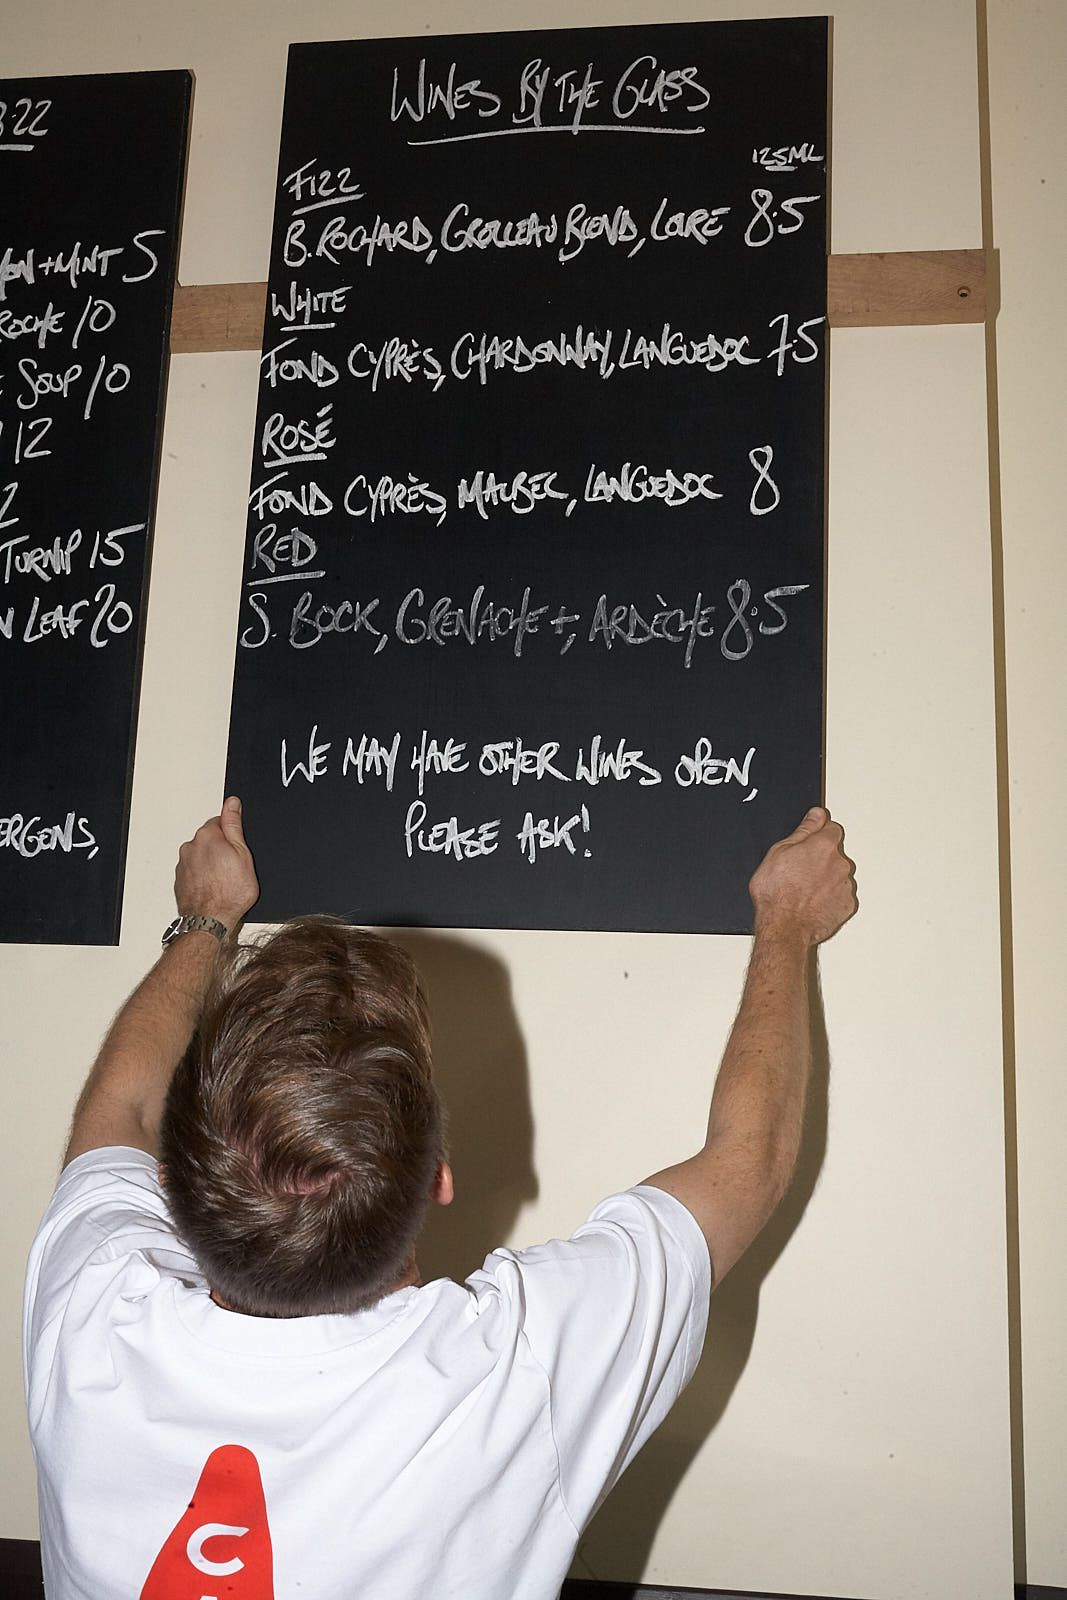 A man in a white t-shirt puts up a blackboard with wines by the glass written in white chalk.